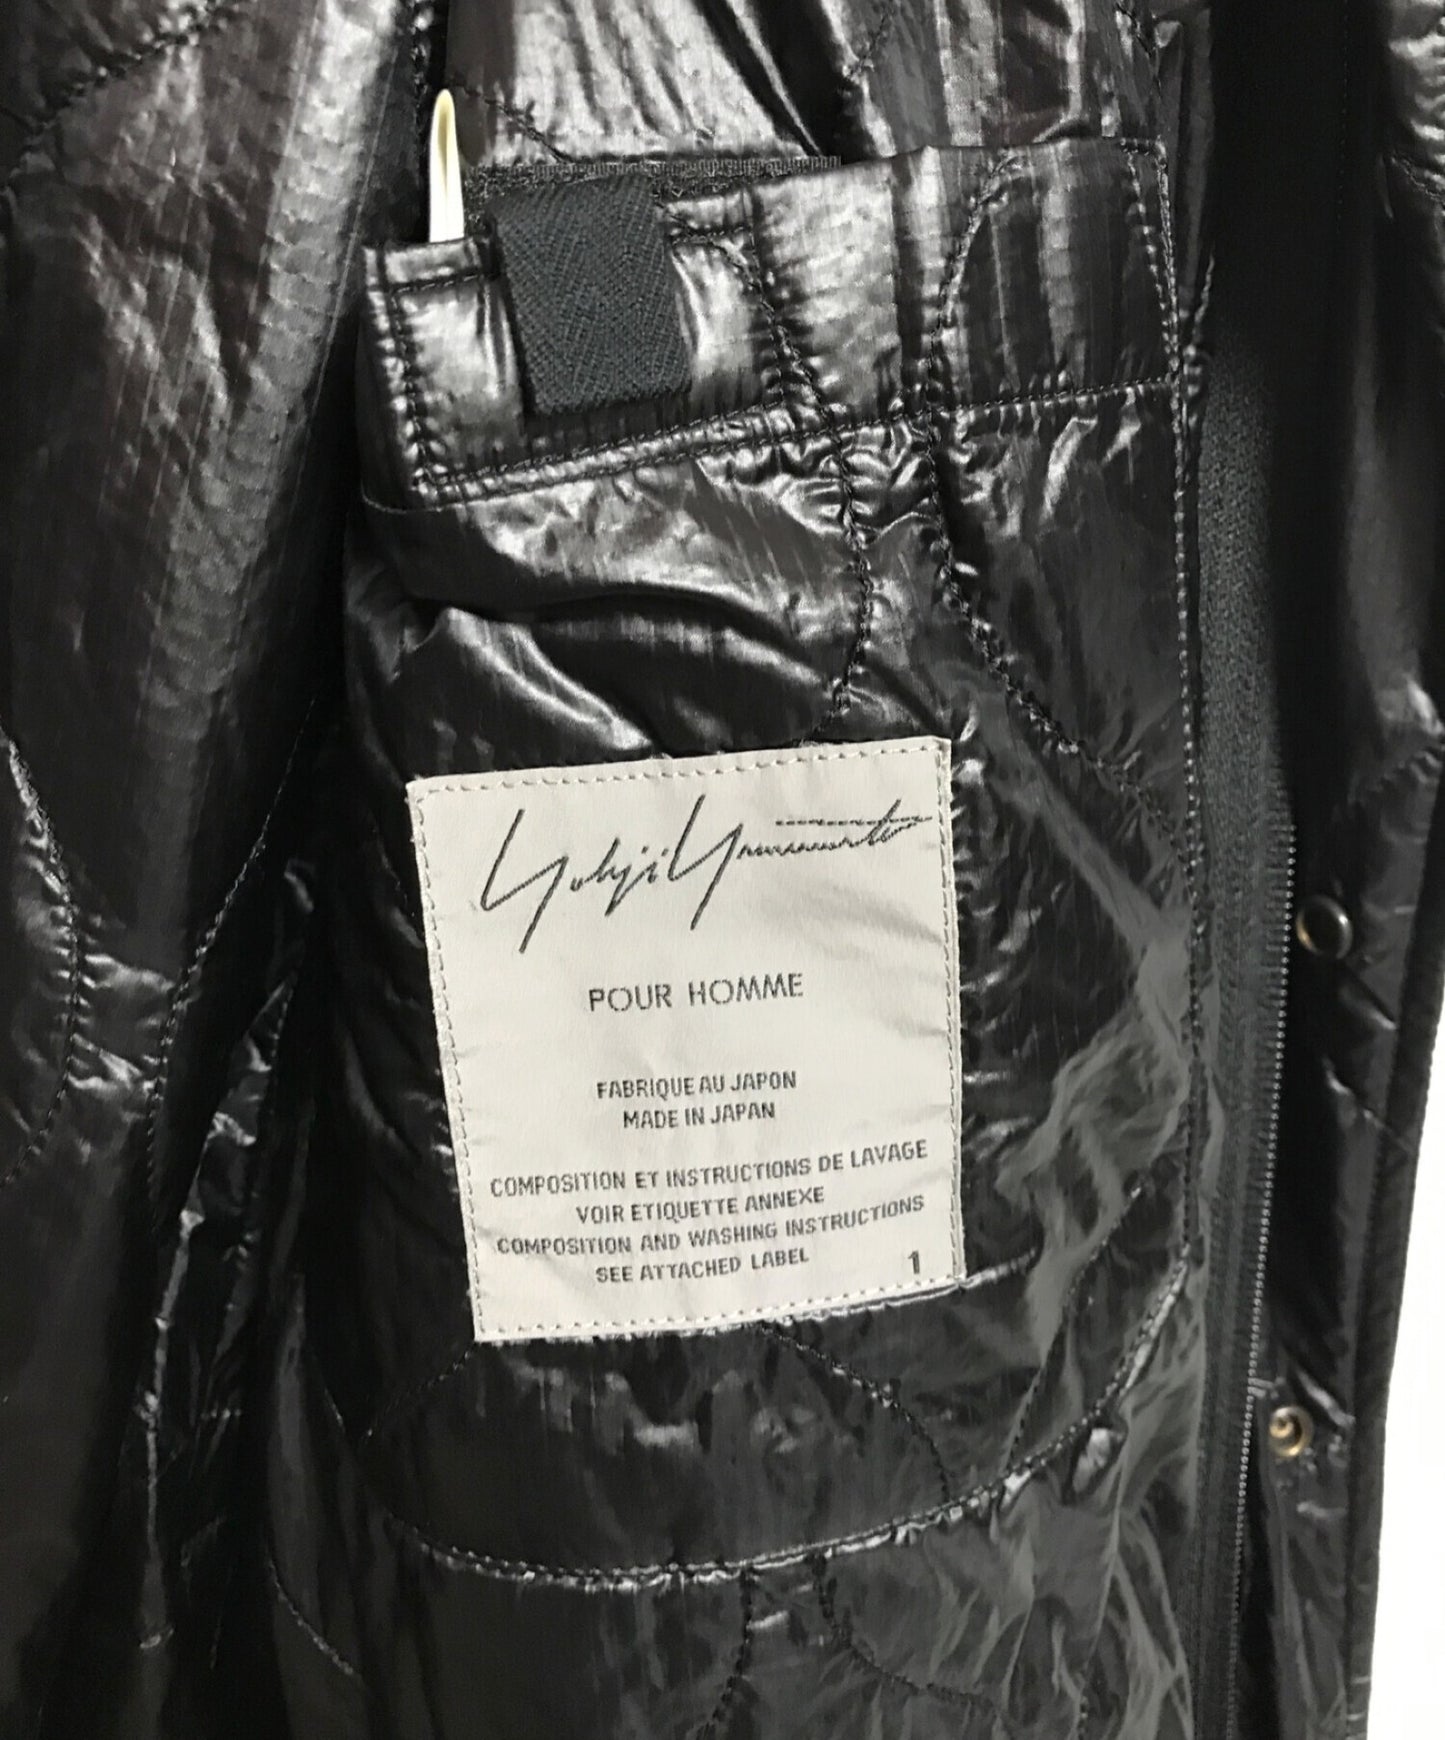 Yohji Yamamoto Pour Homme Quilted Design Hooded Coat HX-C03-805